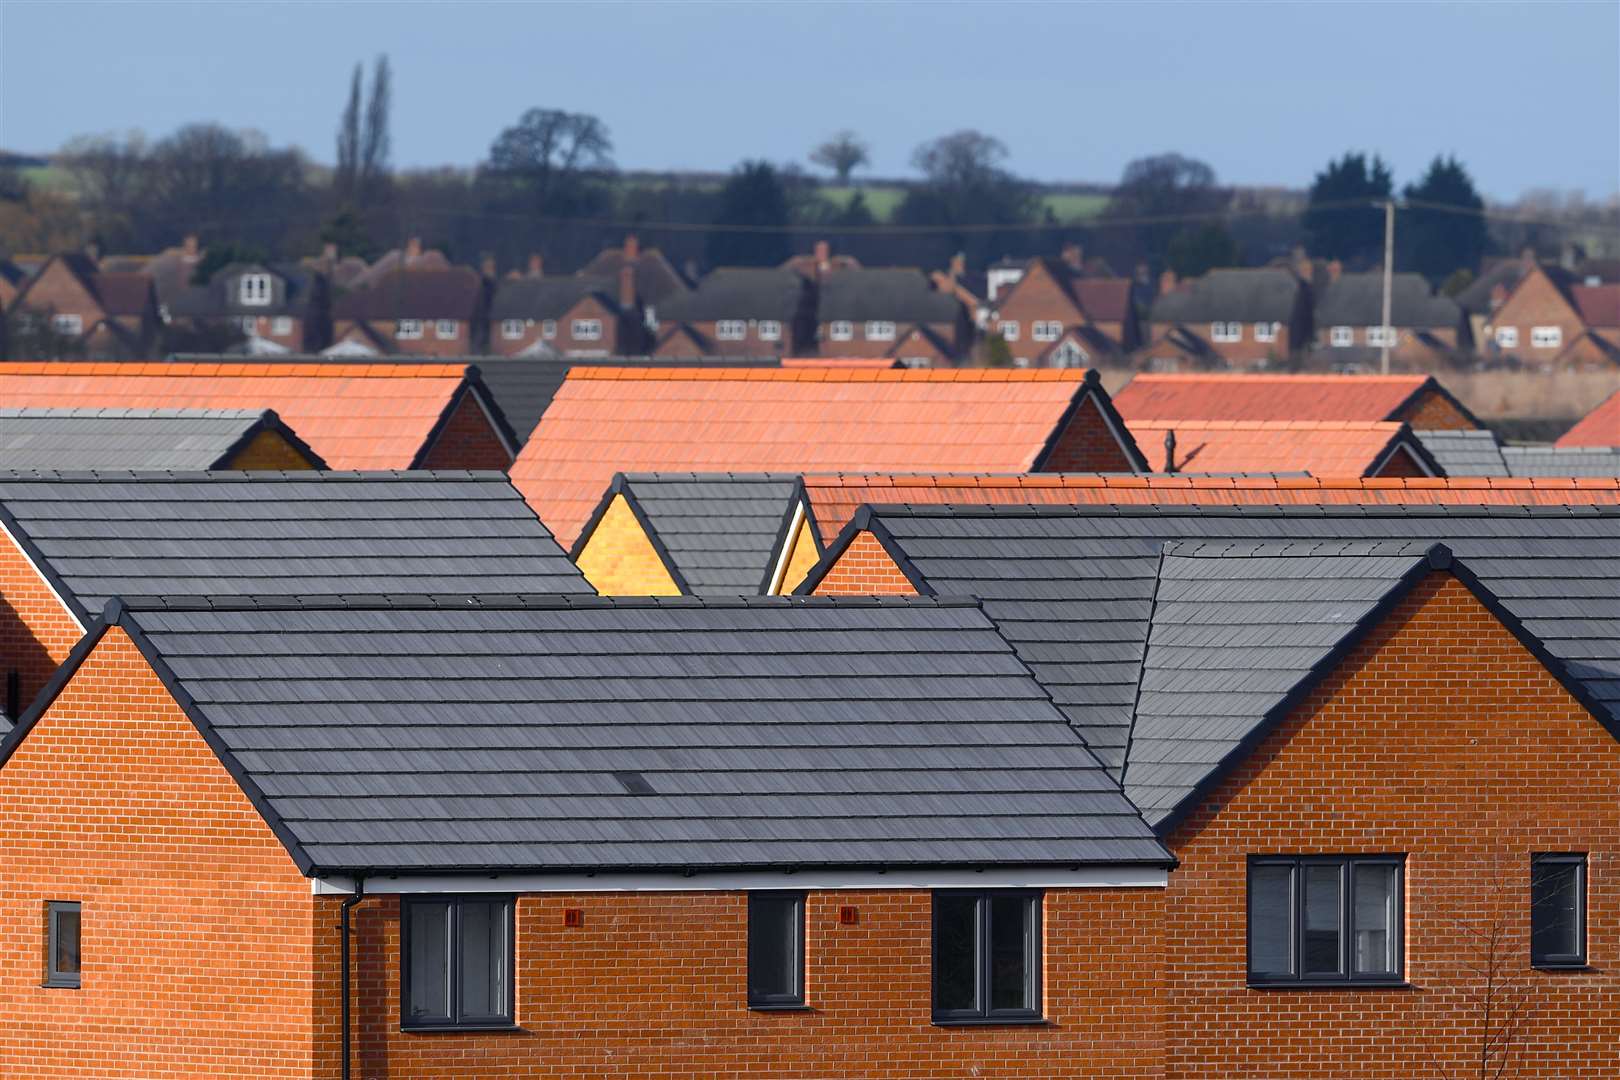 Swale council says sourcing more affordable housing is a top priority